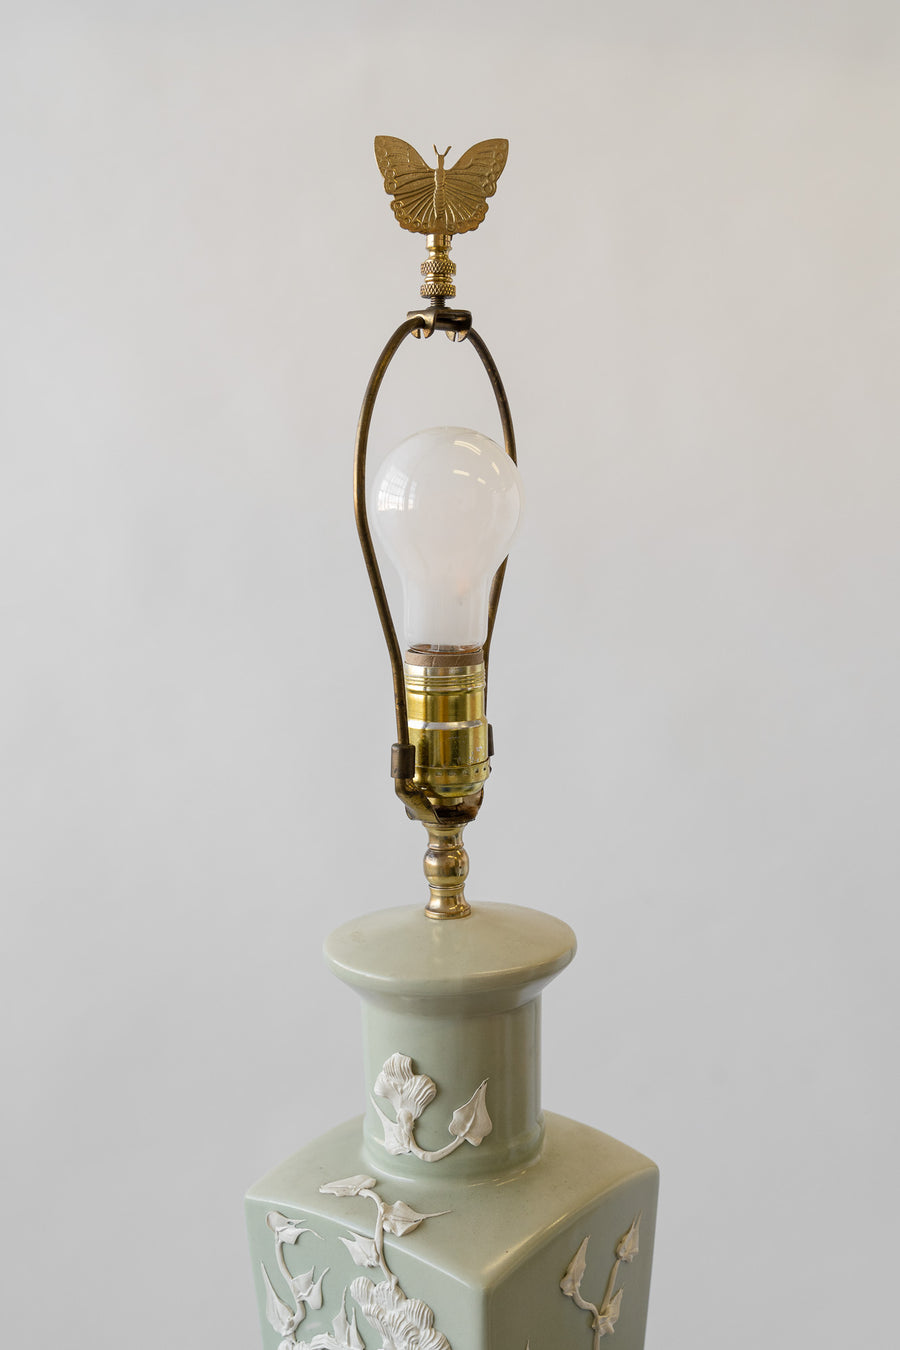 Porcelain Table Lamp with Fluted Shade